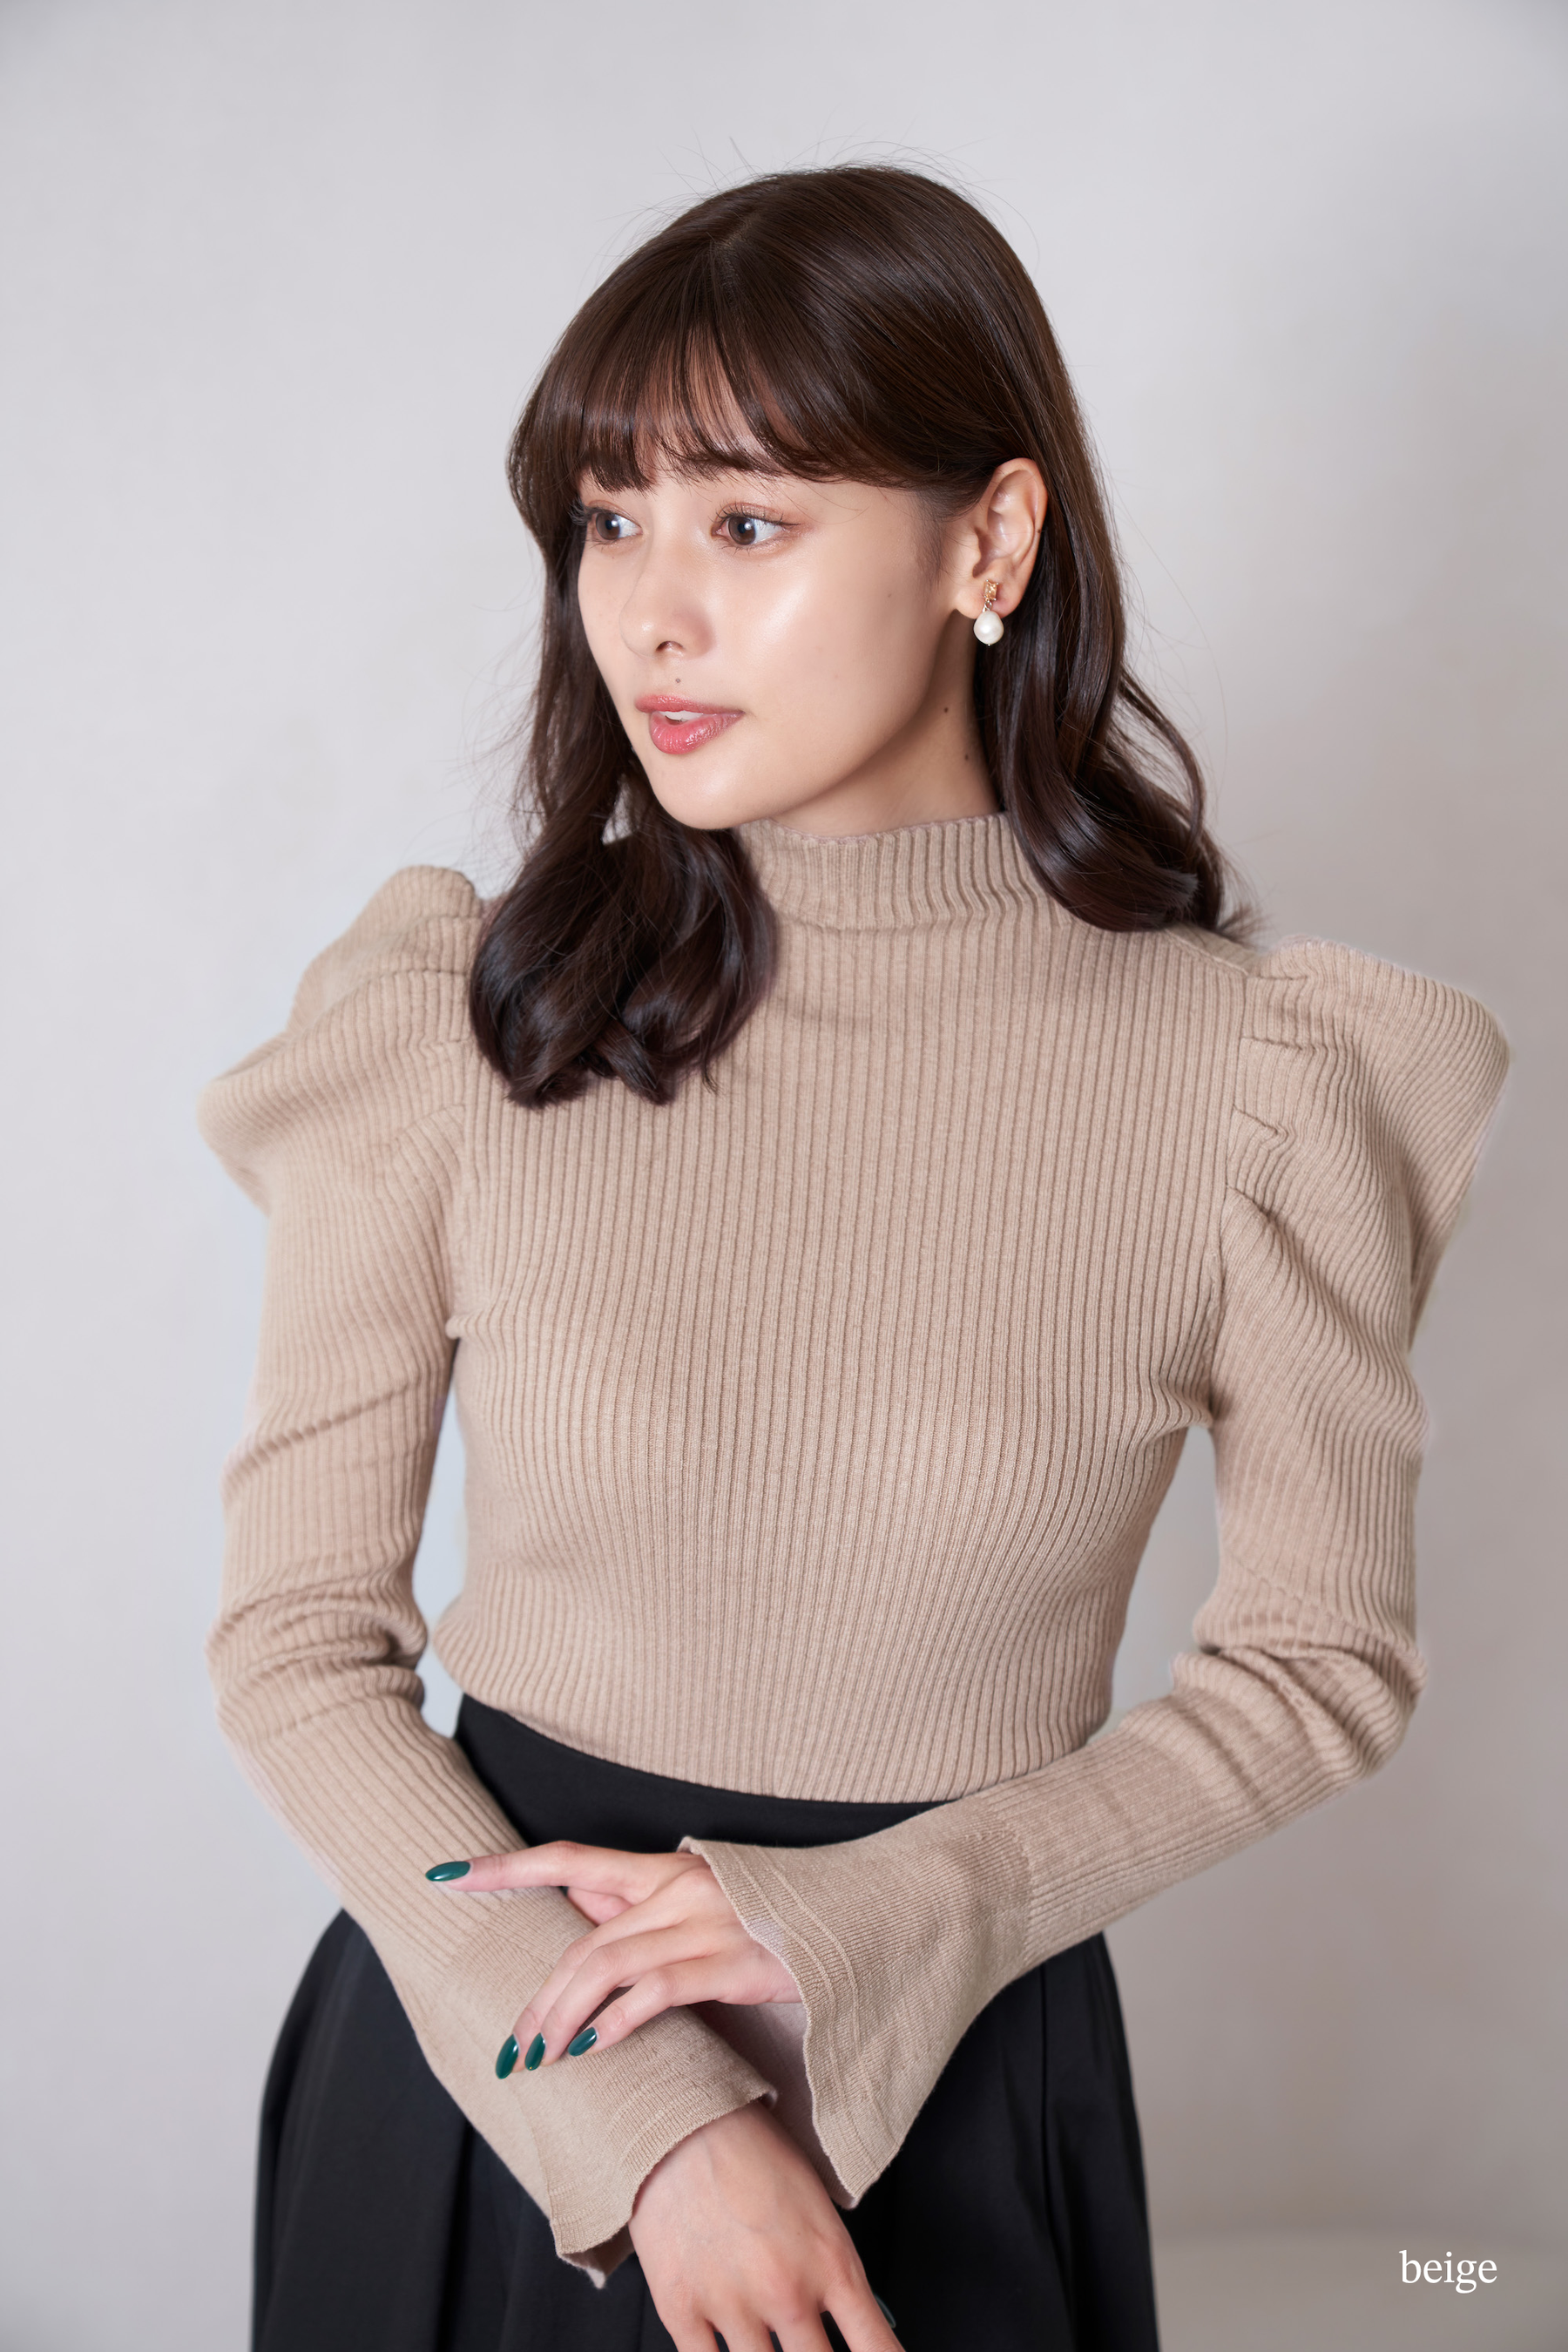 Her lip to Volume Sleeve Rib Knit Top